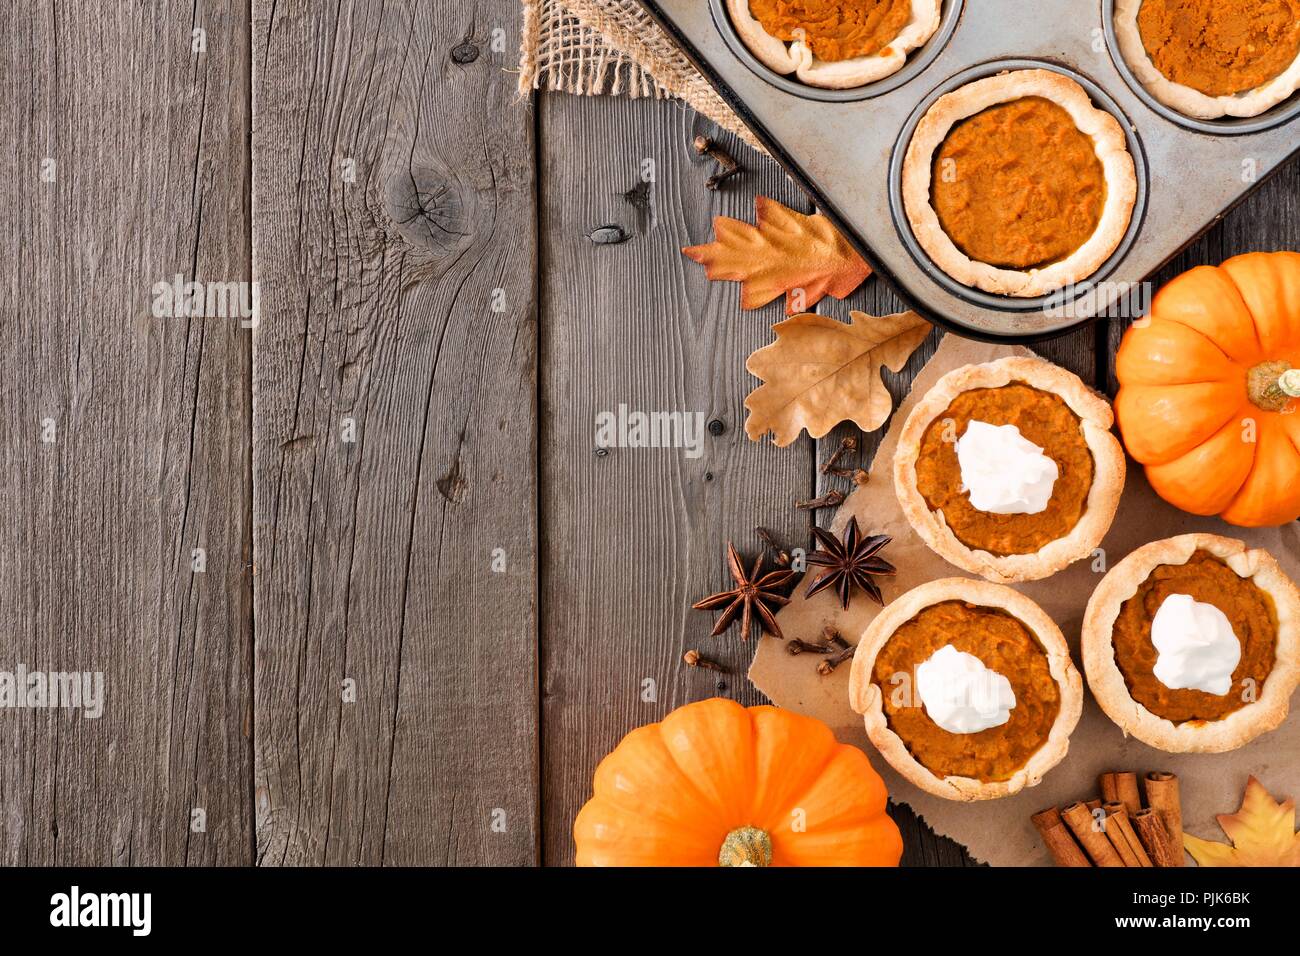 Autumn baking scene side border with pumpkin tarts over a wood background Stock Photo